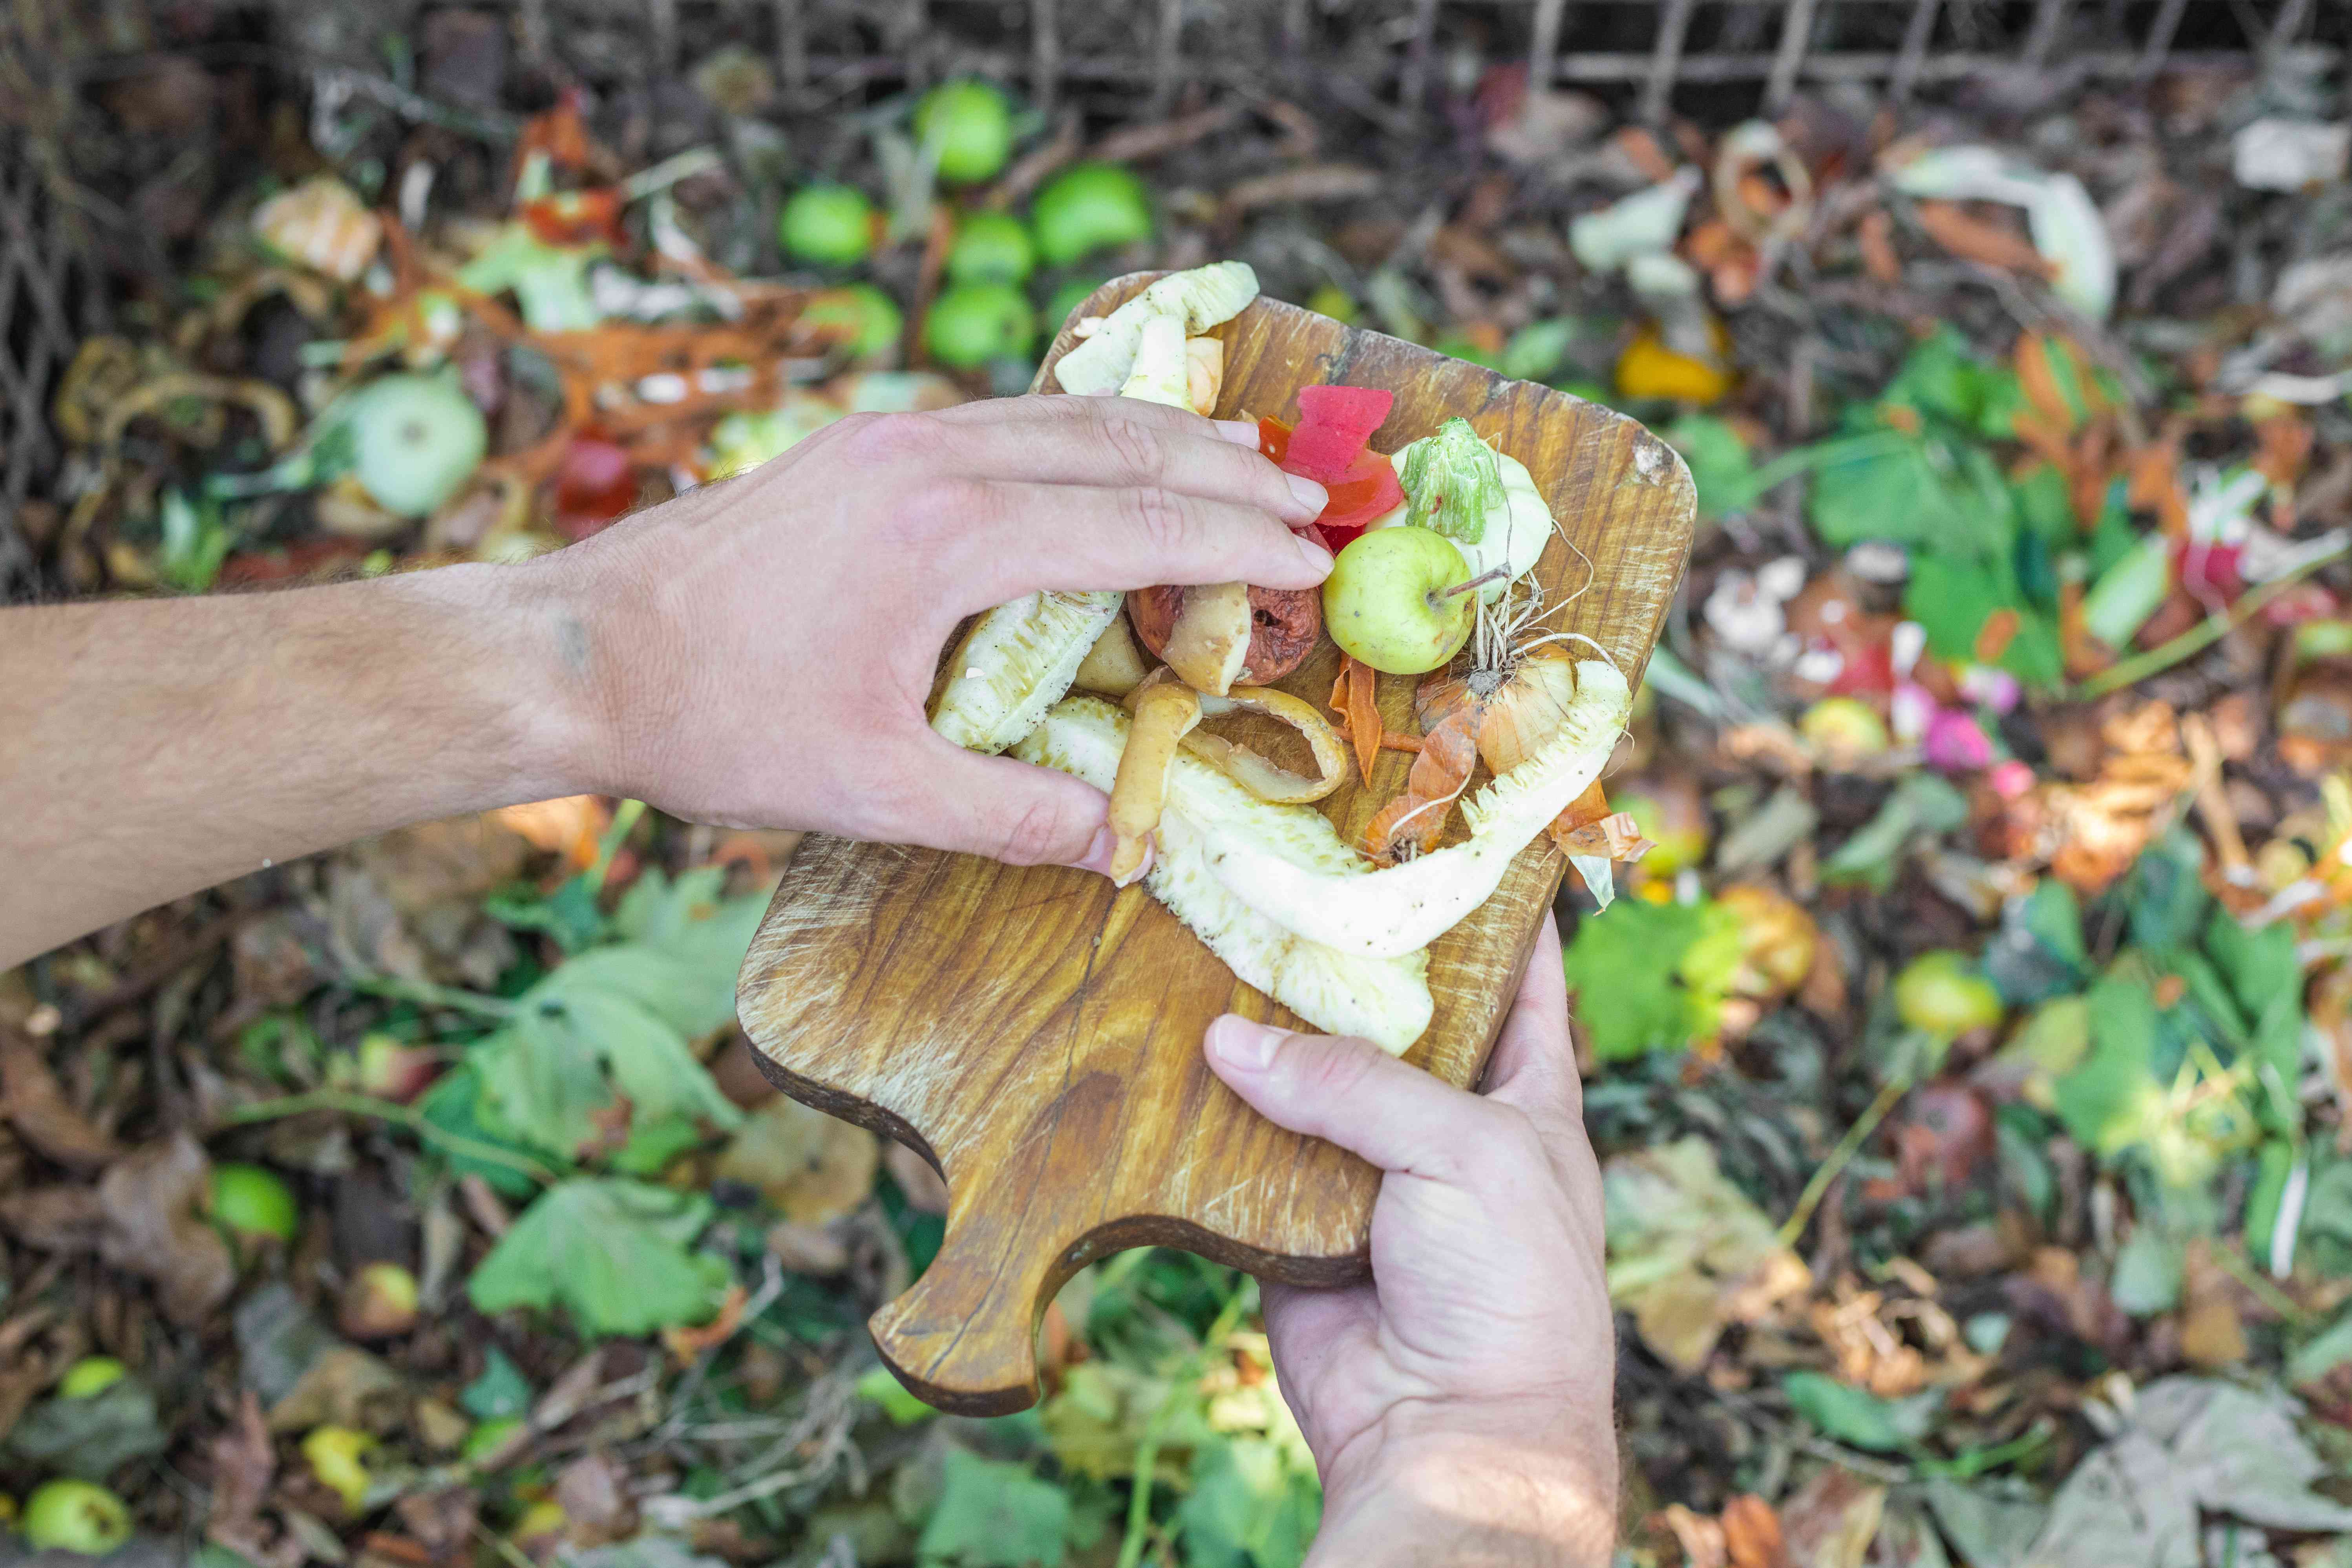 person scoops food scraps from cutting board into open air diy compost bin outside